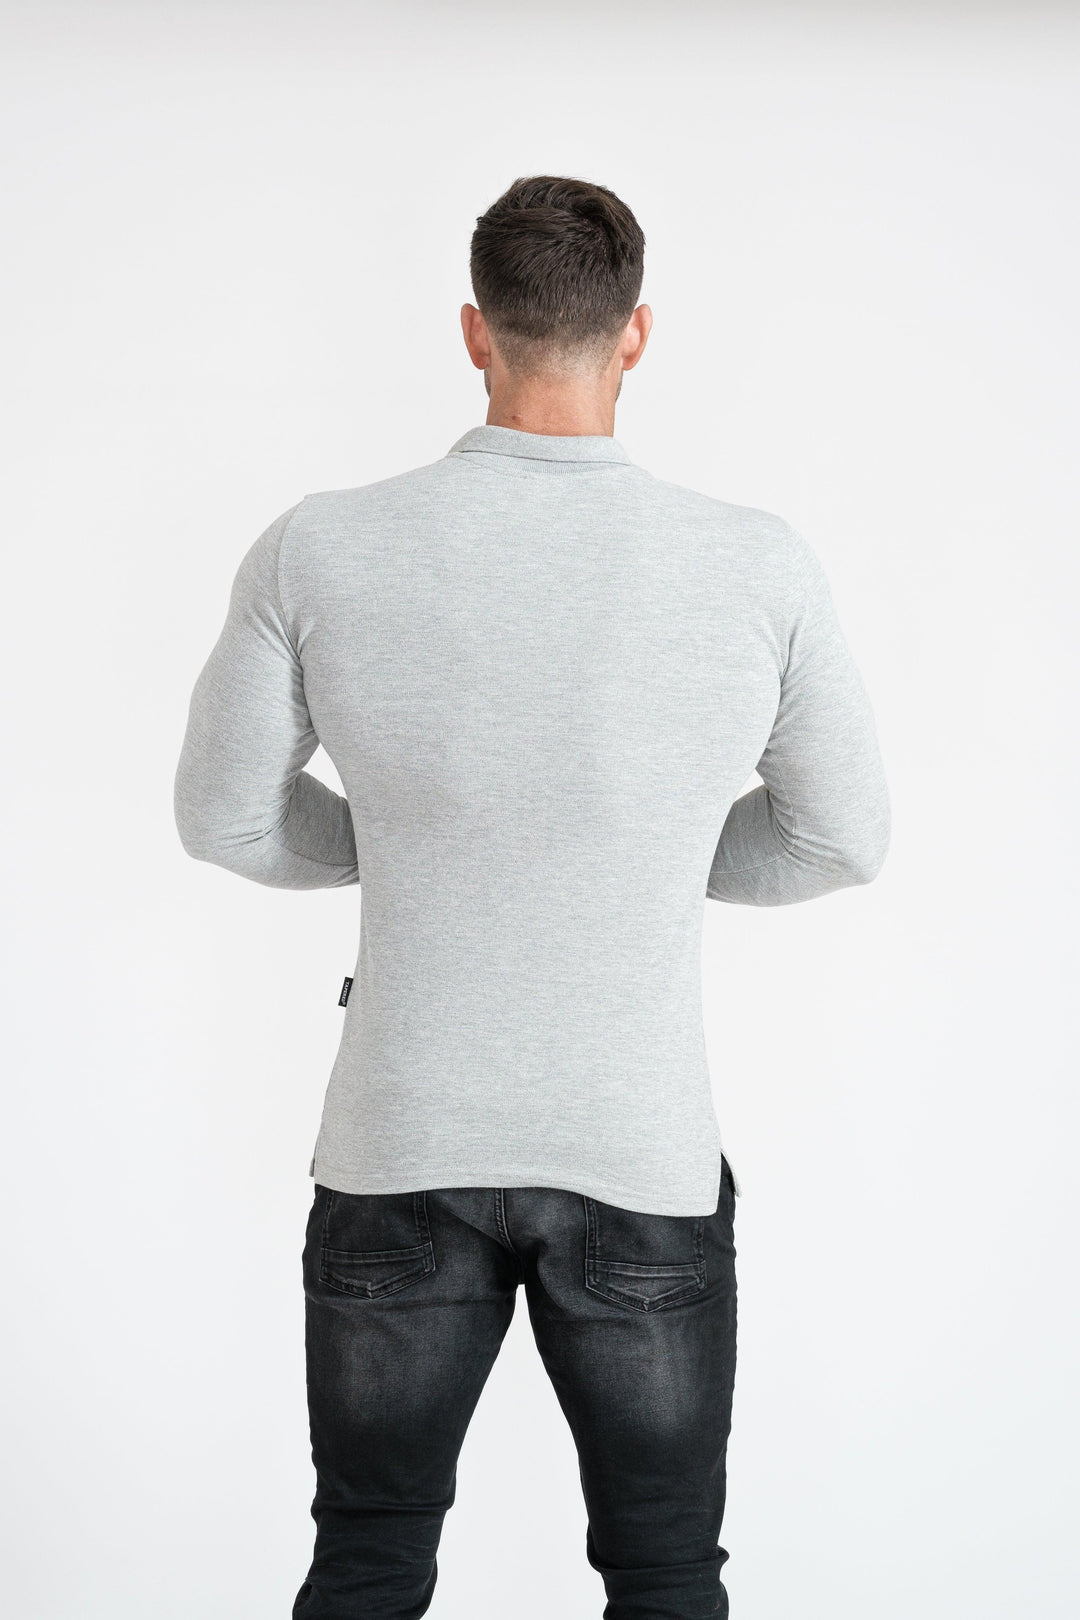 Mens Muscle Fit Grey Polo Shirt. A Proportionally Fitted and Muscle Fit Polo shirt. Ideal for bodybuilders.